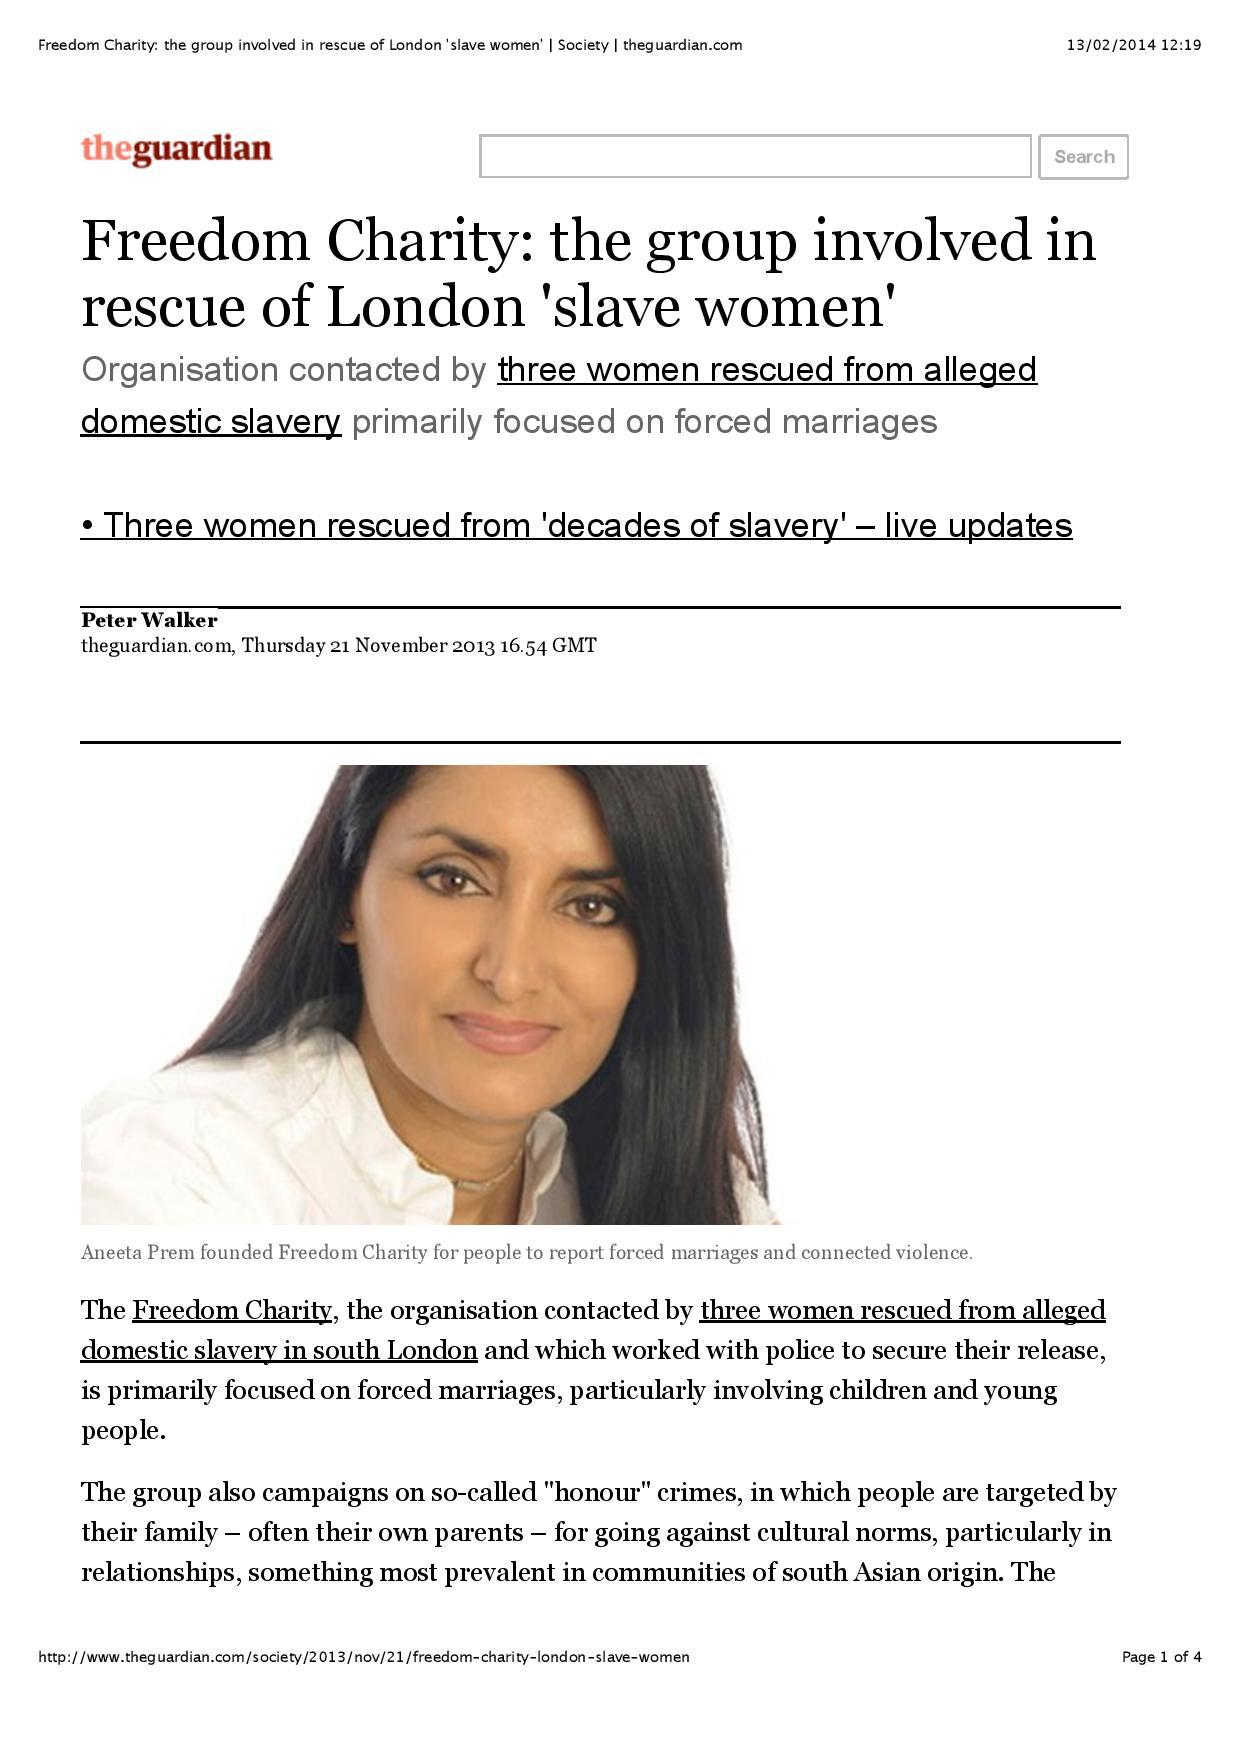 done-freedom-charity-the-group-involved-in-rescue-of-london-slave-women-society-theguardian-com-page-001